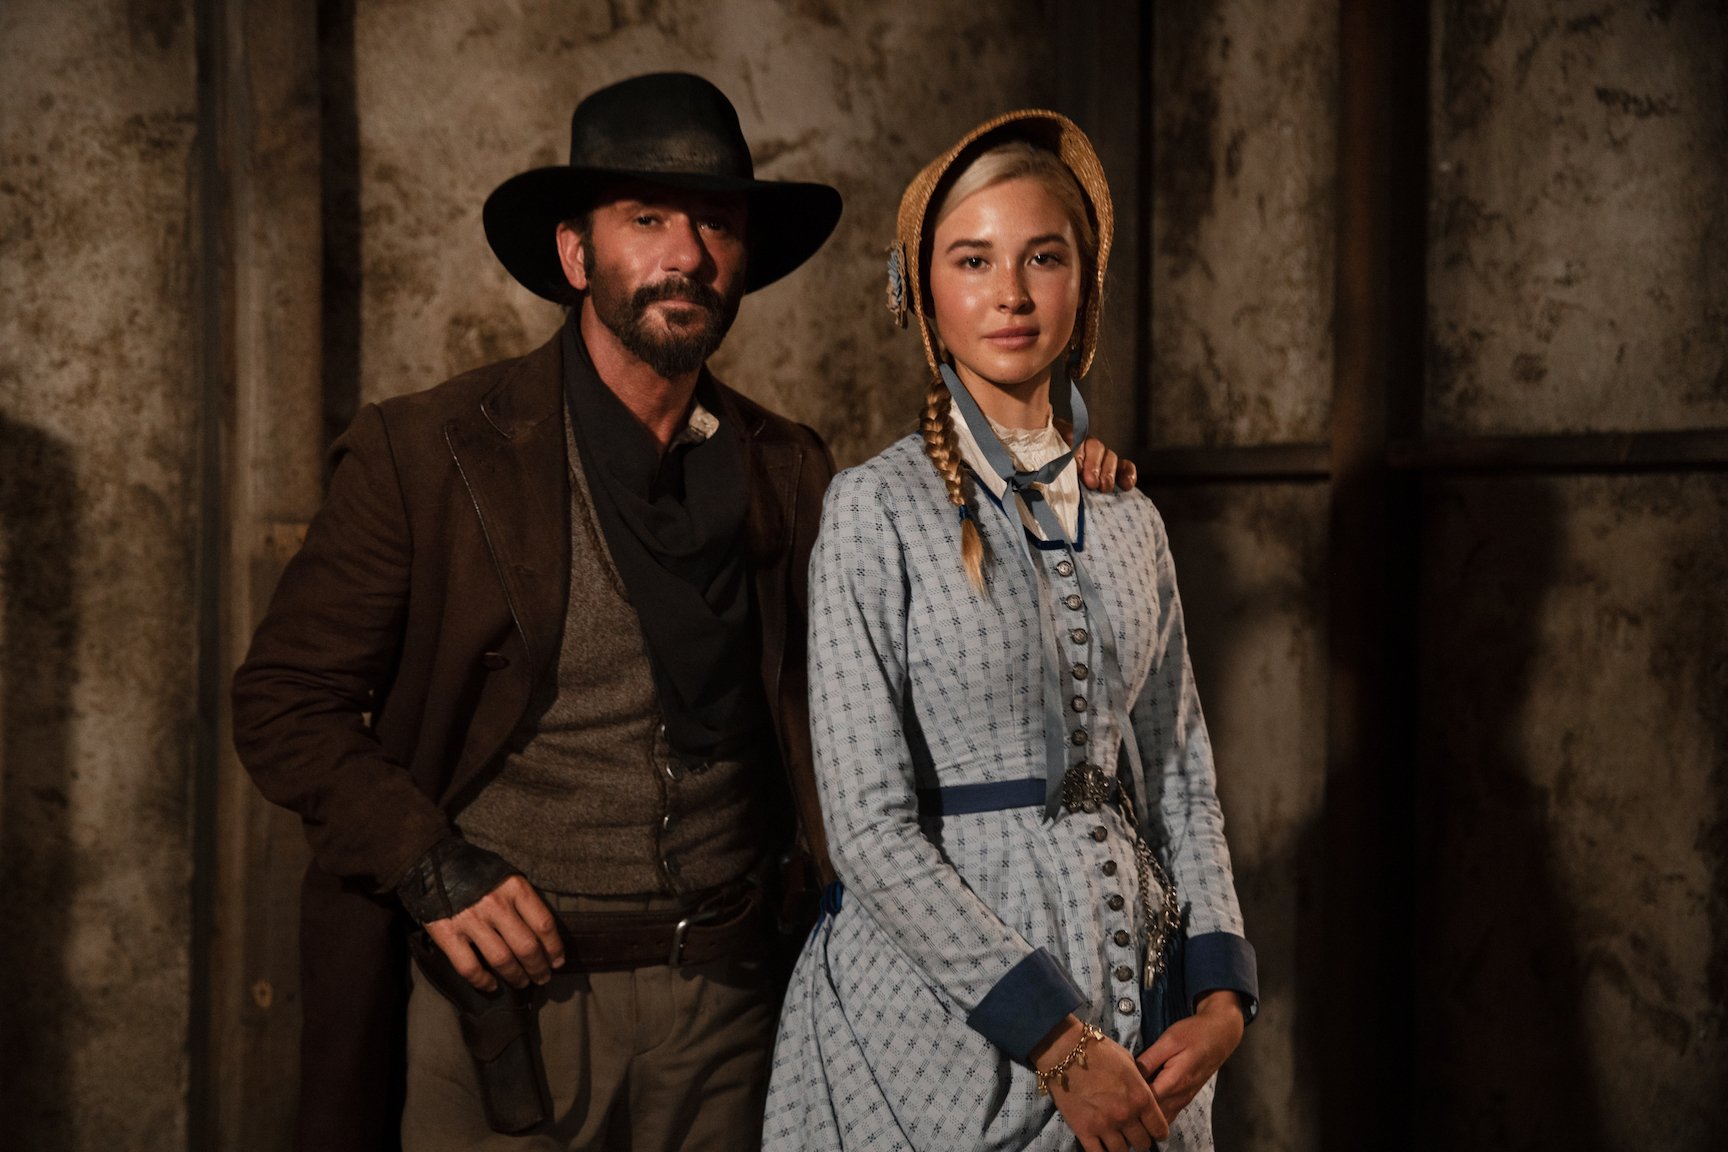 '1883' stars Tim McGraw as James Dutton and Isabel May as Elsa Dutton standing together for a portrait